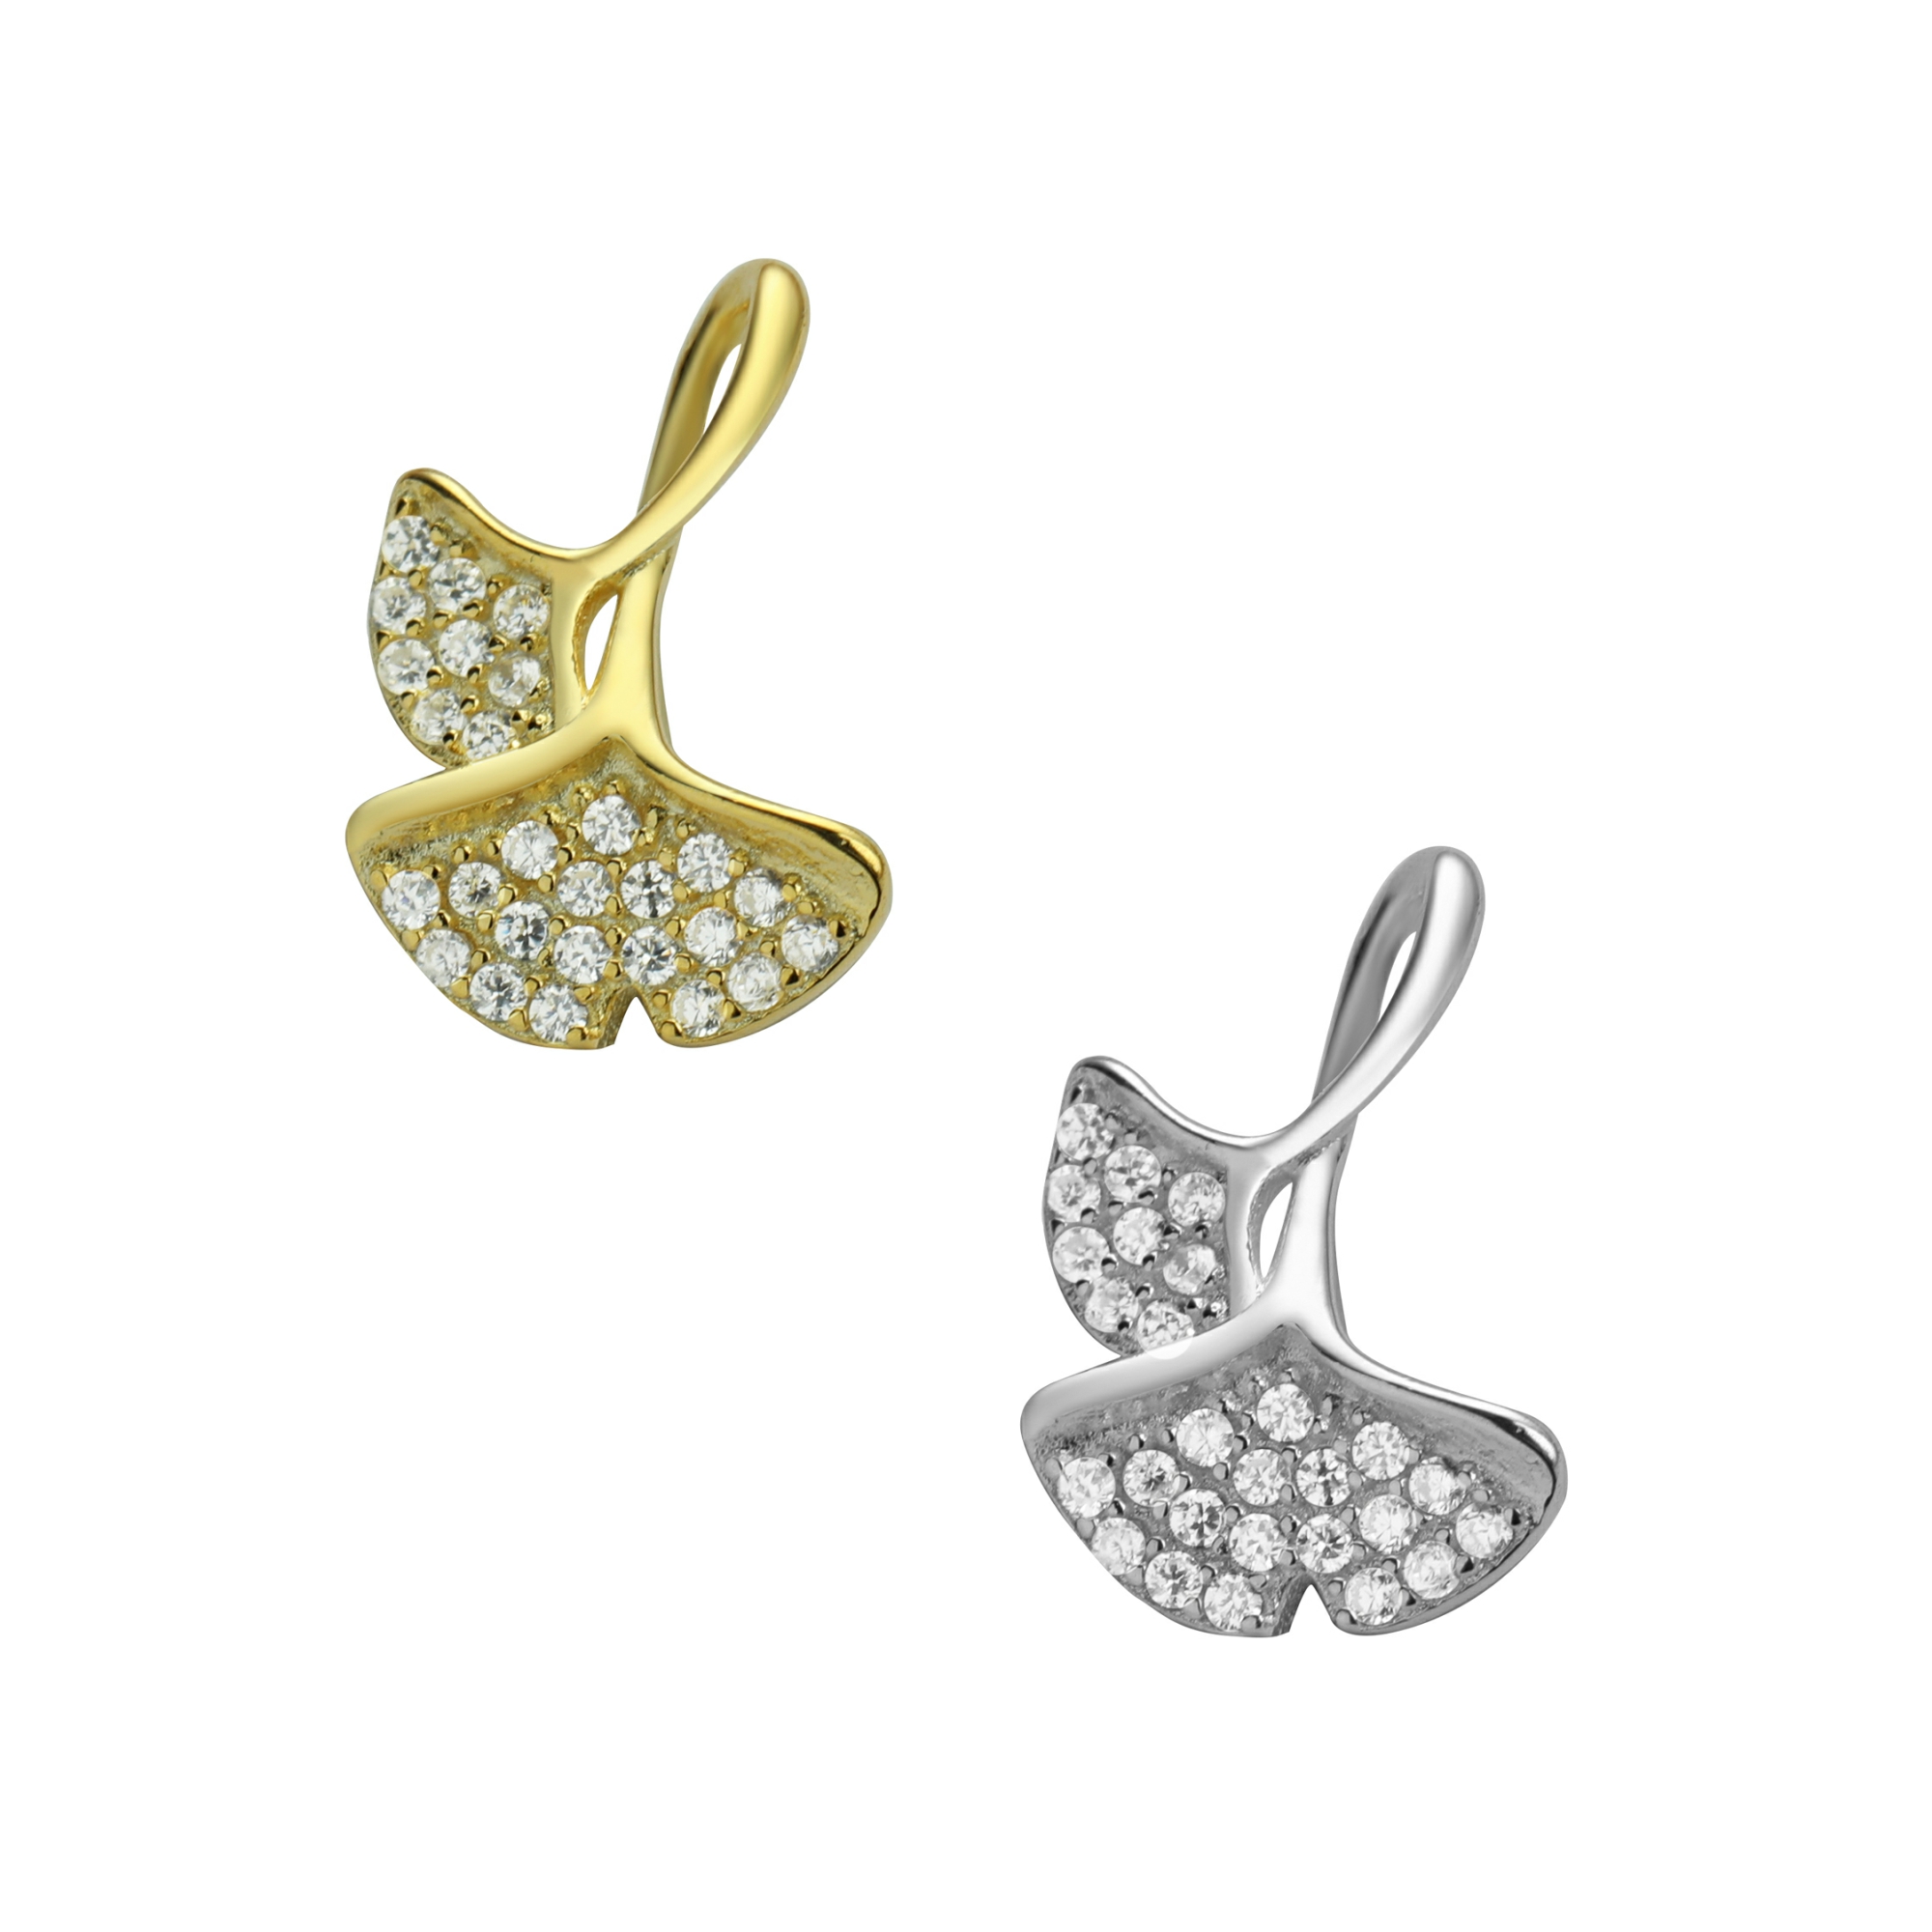 12MM Pave CZ Stone Ginkgo Biloba Leaf Charm,Solid 925 Sterling Silver Gold Plated Pendant Charm,DIY Charm Supplies 1431189 - Click Image to Close